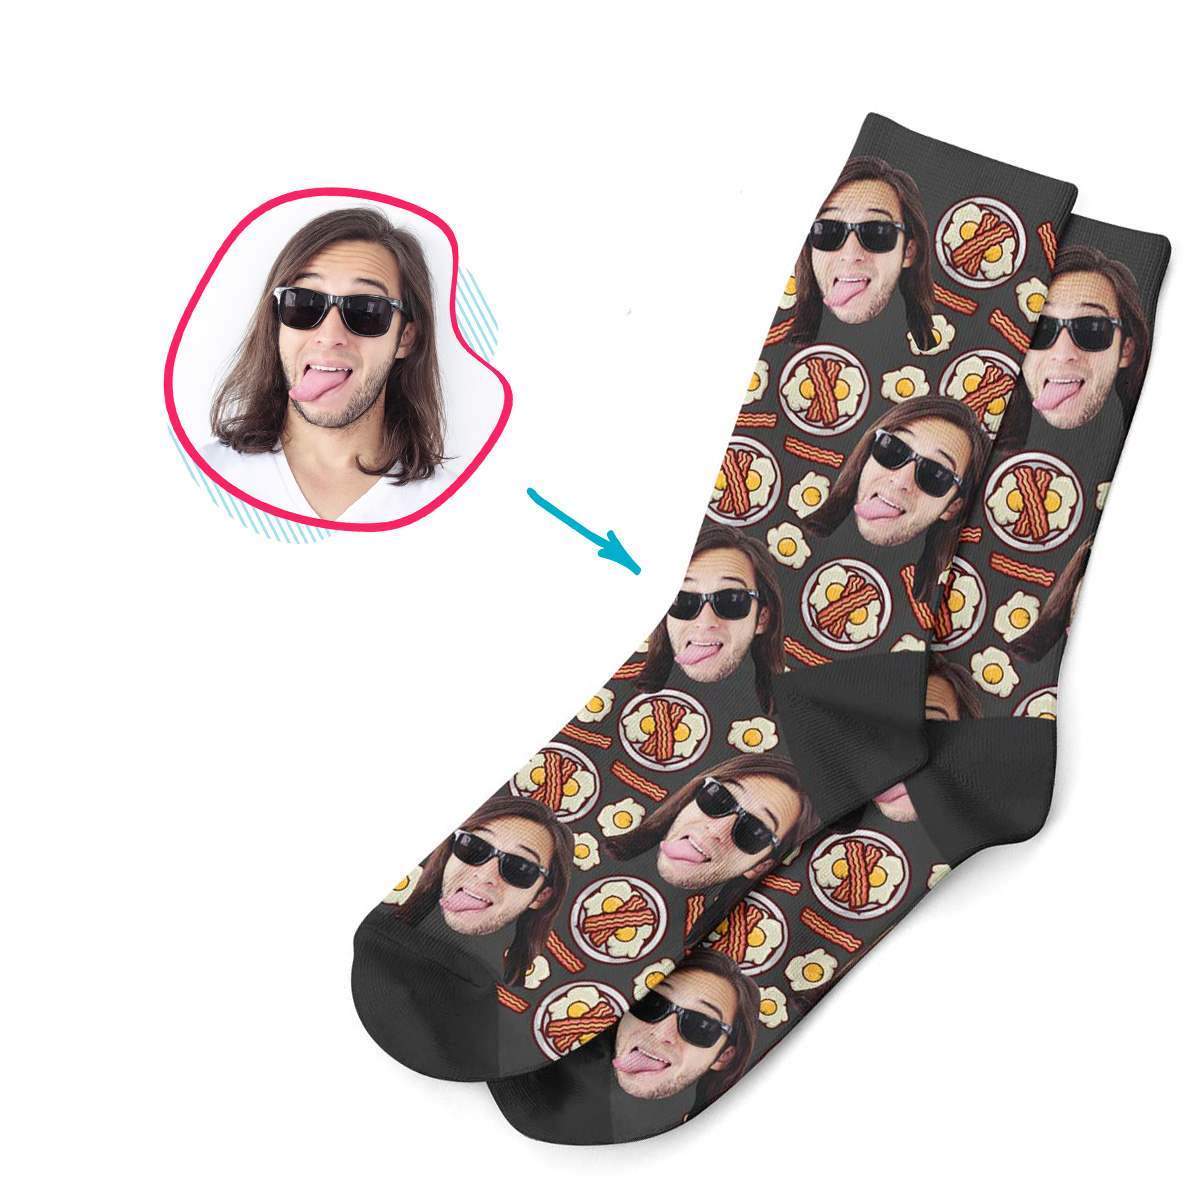 dark Bacon and Eggs socks personalized with photo of face printed on them